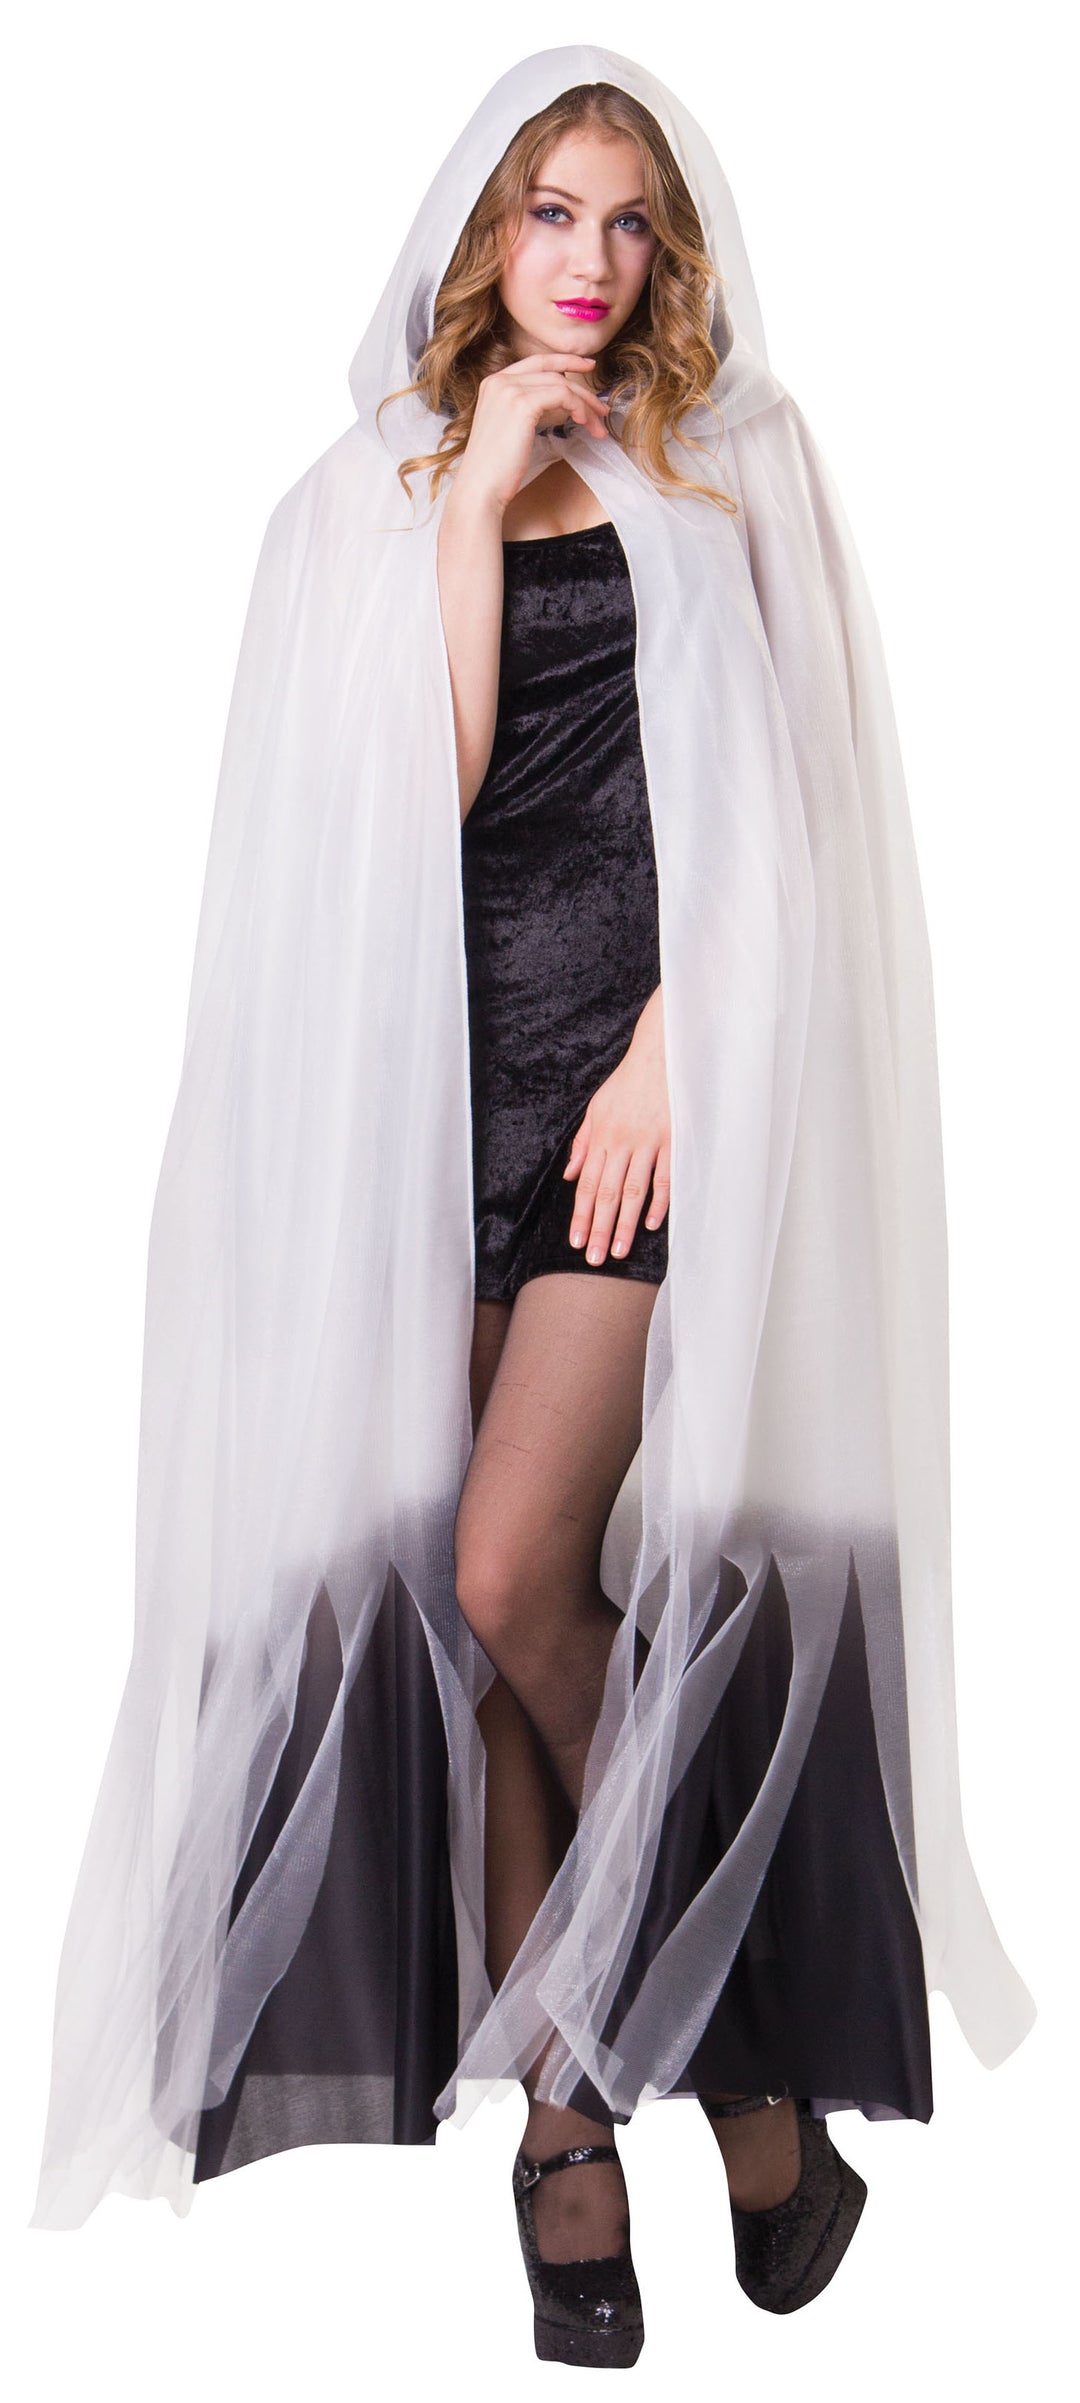 White Hooded Cape with Black Ombre Costume Accessory